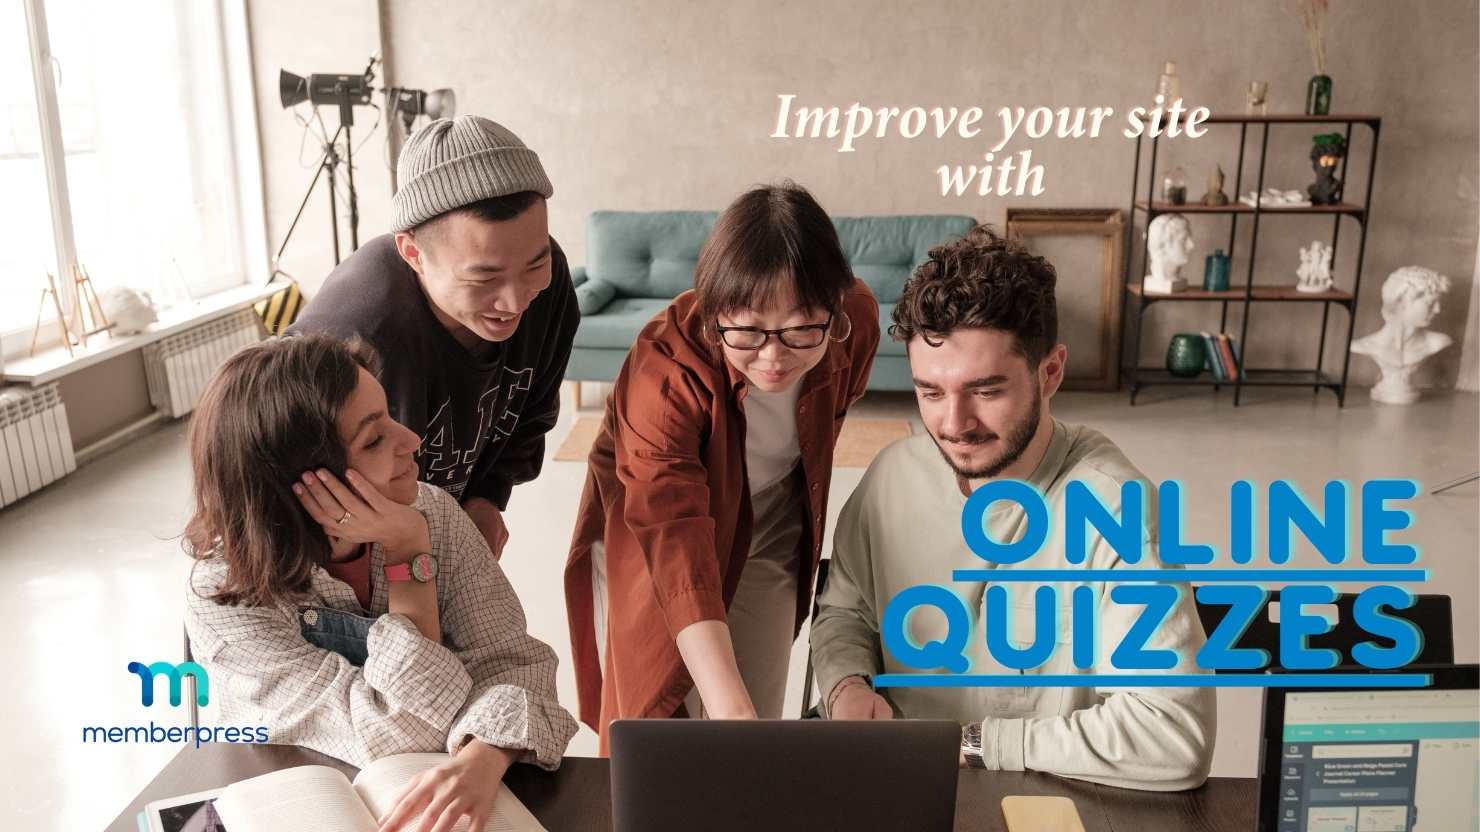 Text reads "improve your site with online quizzes". The memberpress logo is present.